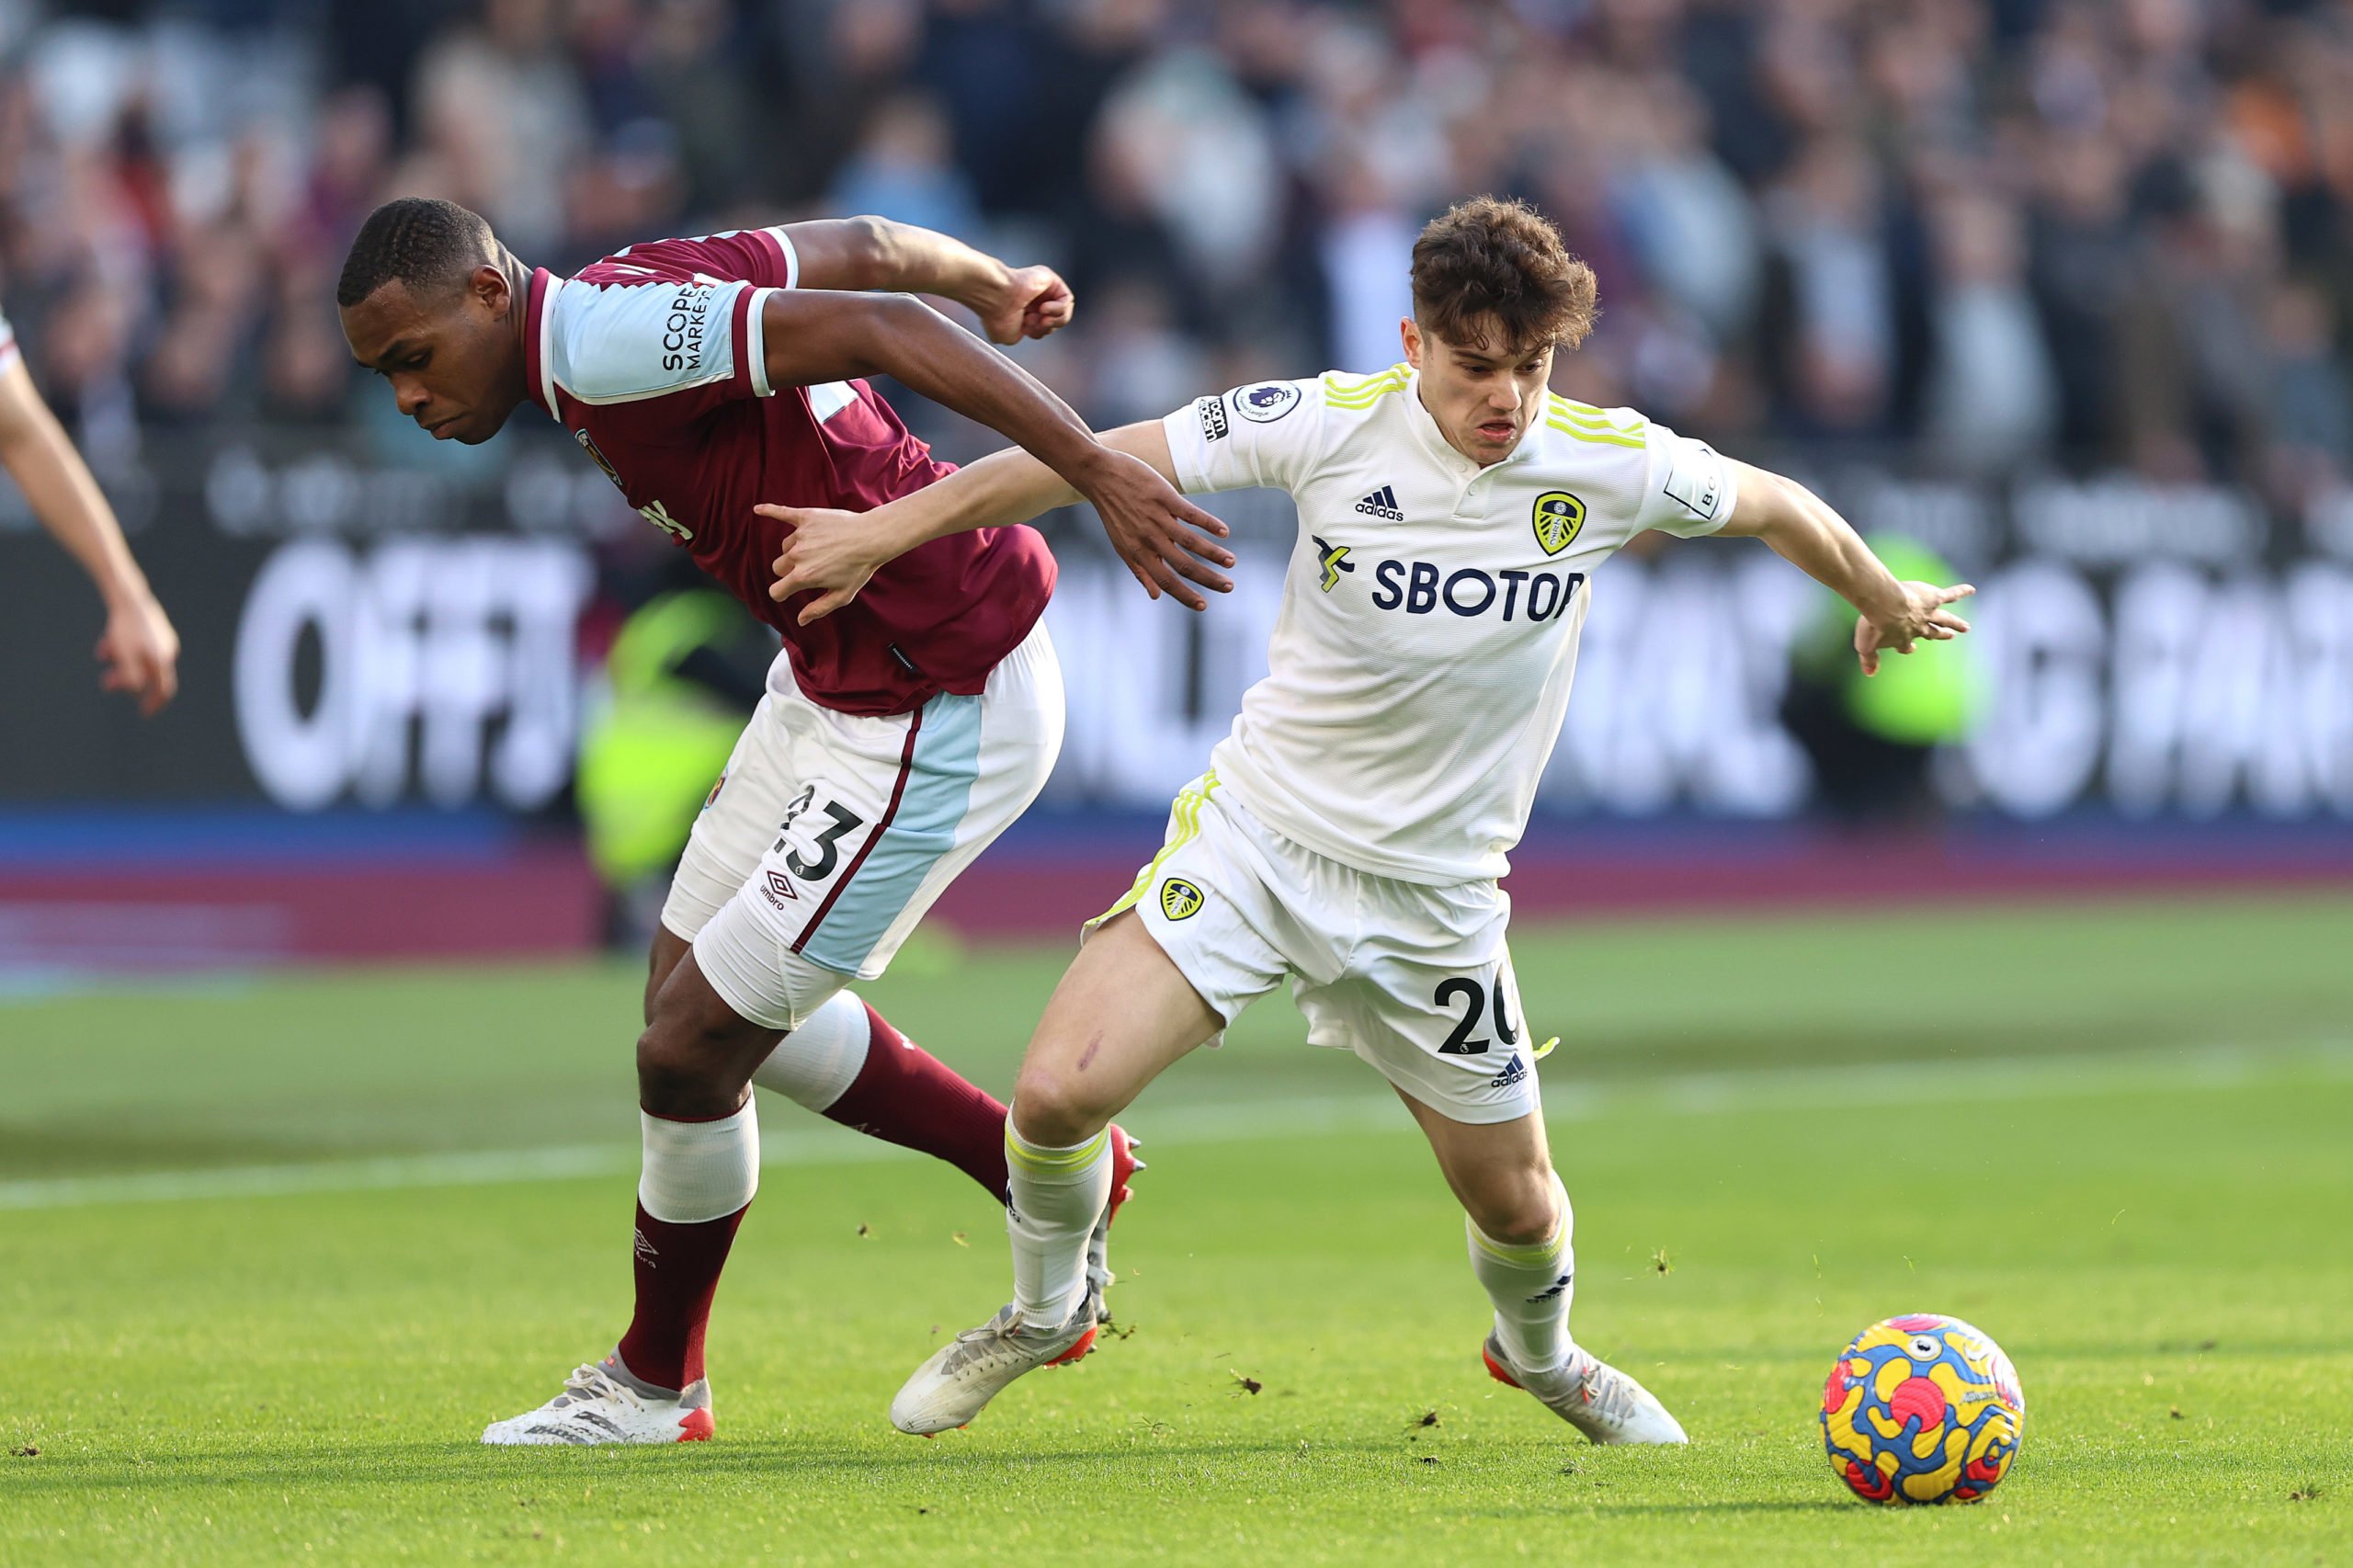 'This is a shame': Some West Ham fans aren't happy as report claims Newcastle could sign Issa Diop